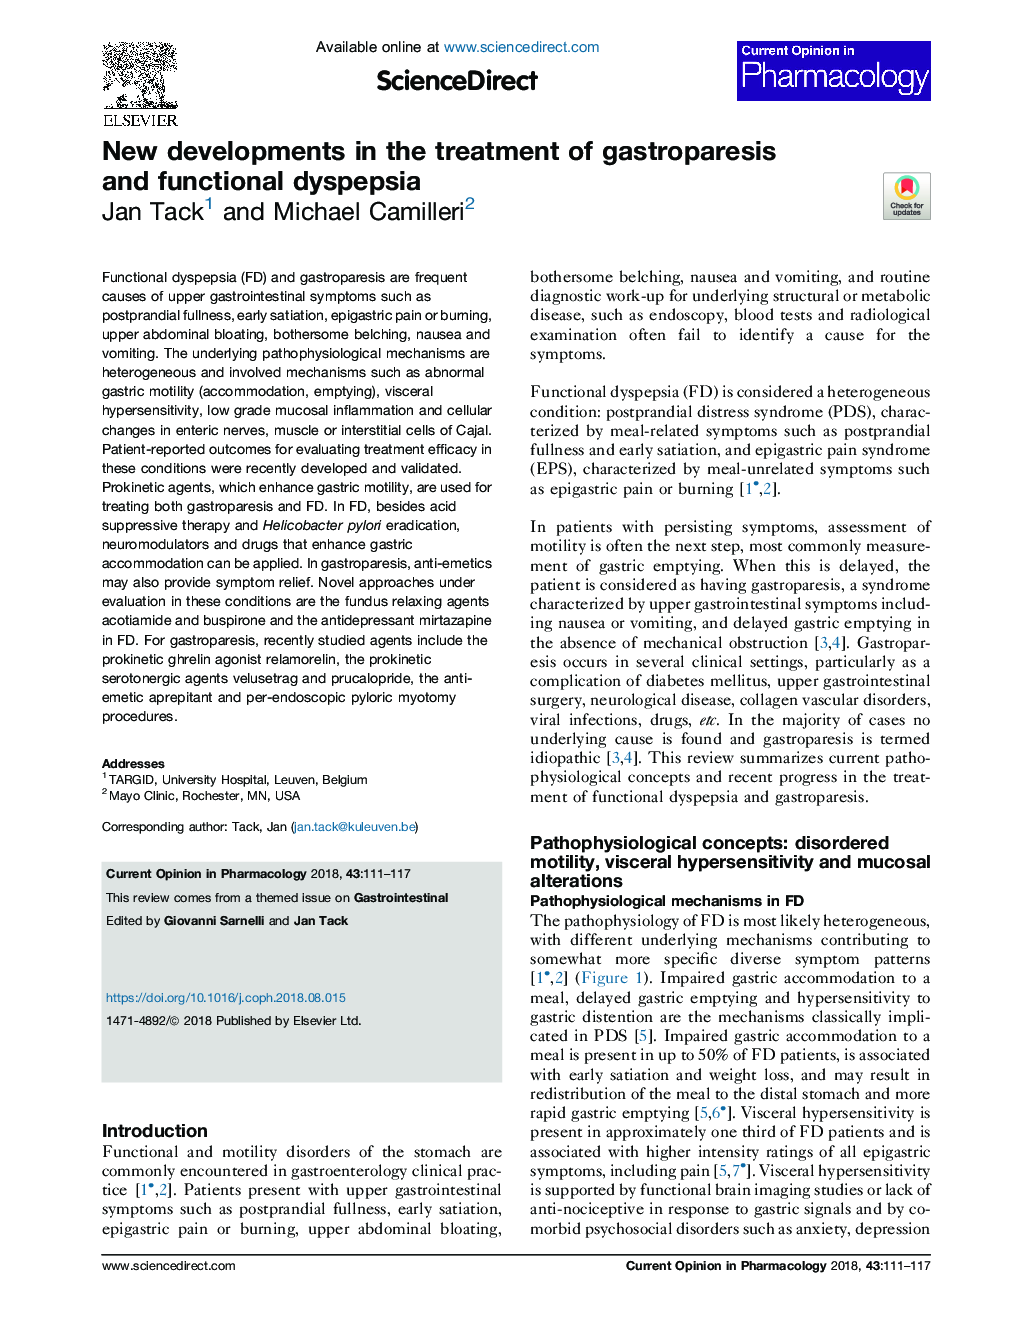 New developments in the treatment of gastroparesis and functional dyspepsia